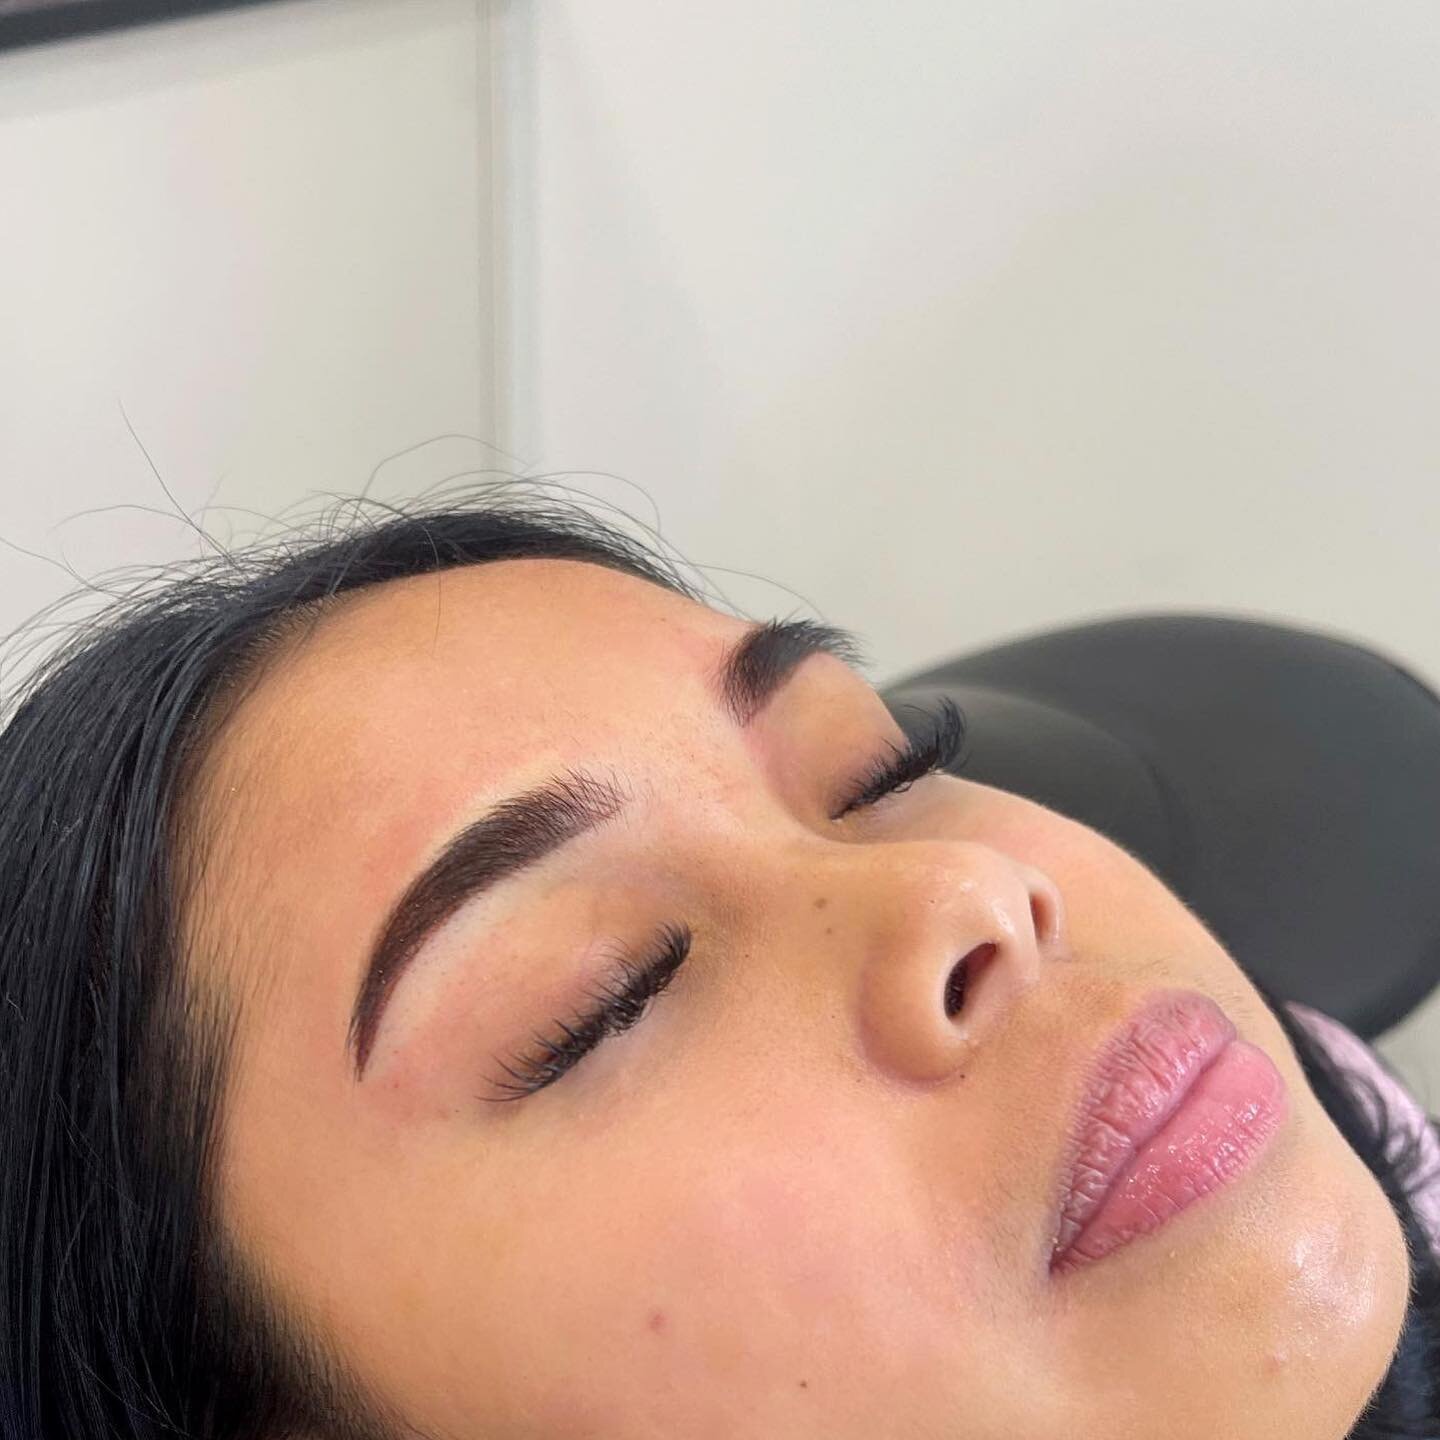 Combo eyebrow tattoo by @bunnylashes_perth_poy she is doing a 50% promo at the moment. Book your appointment now through dm/message.